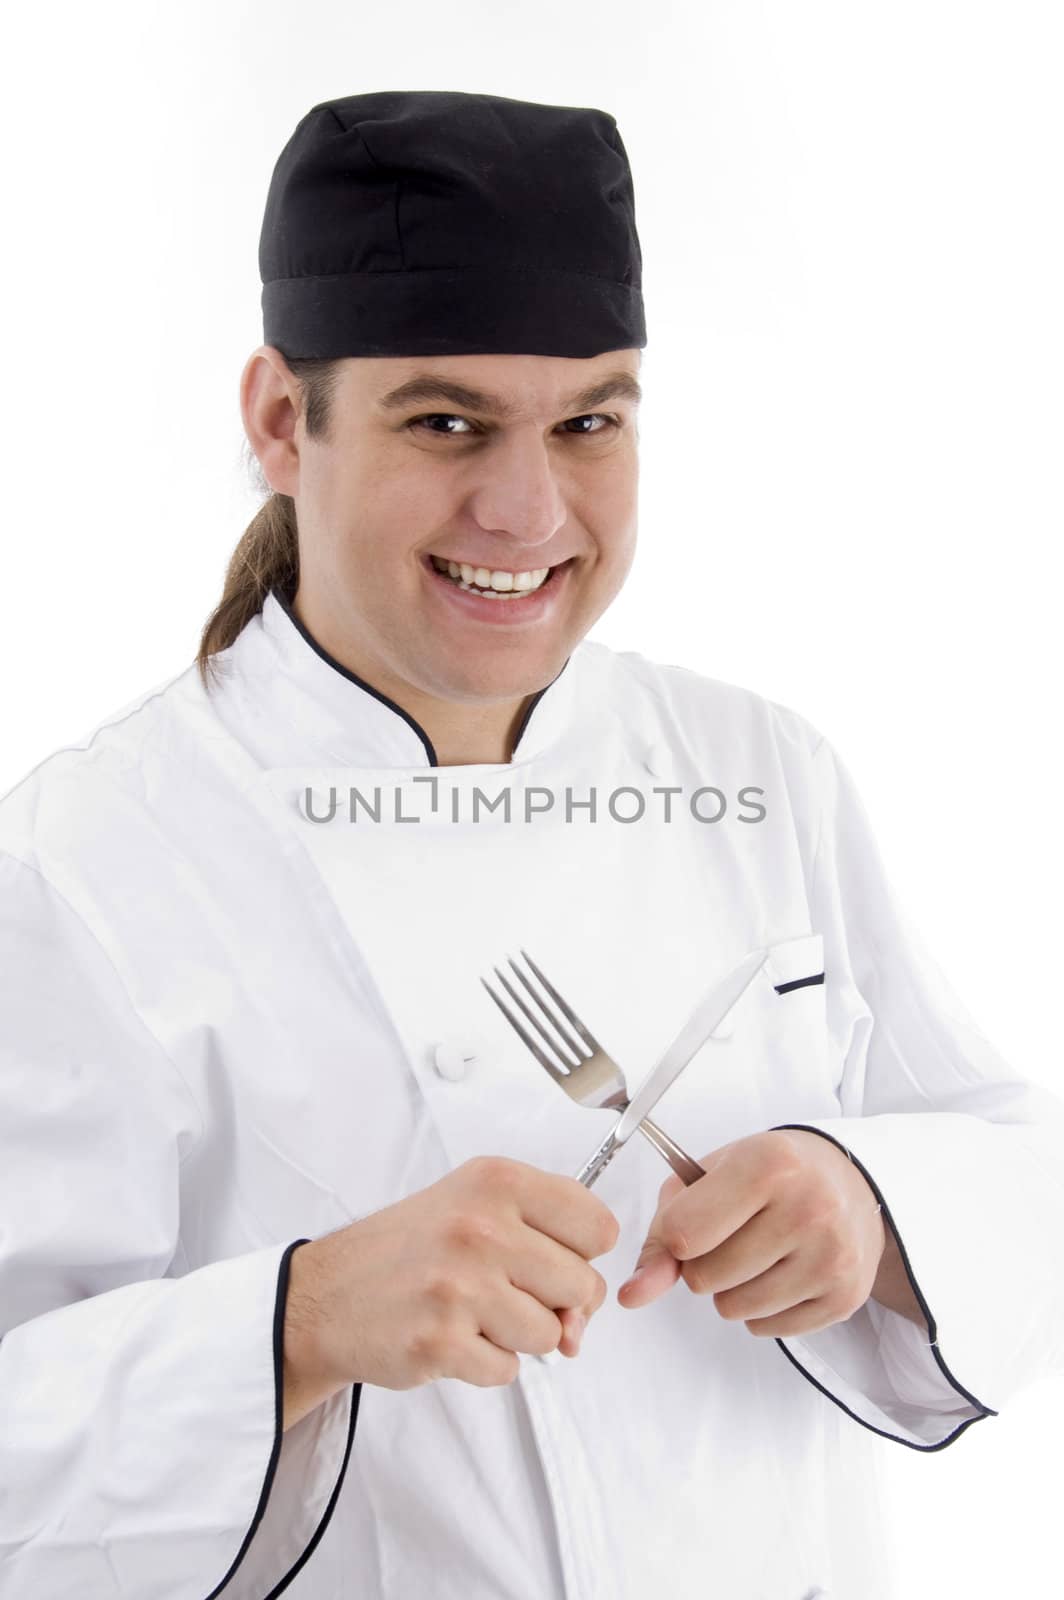 smiling young male chef holding fork and knife by imagerymajestic